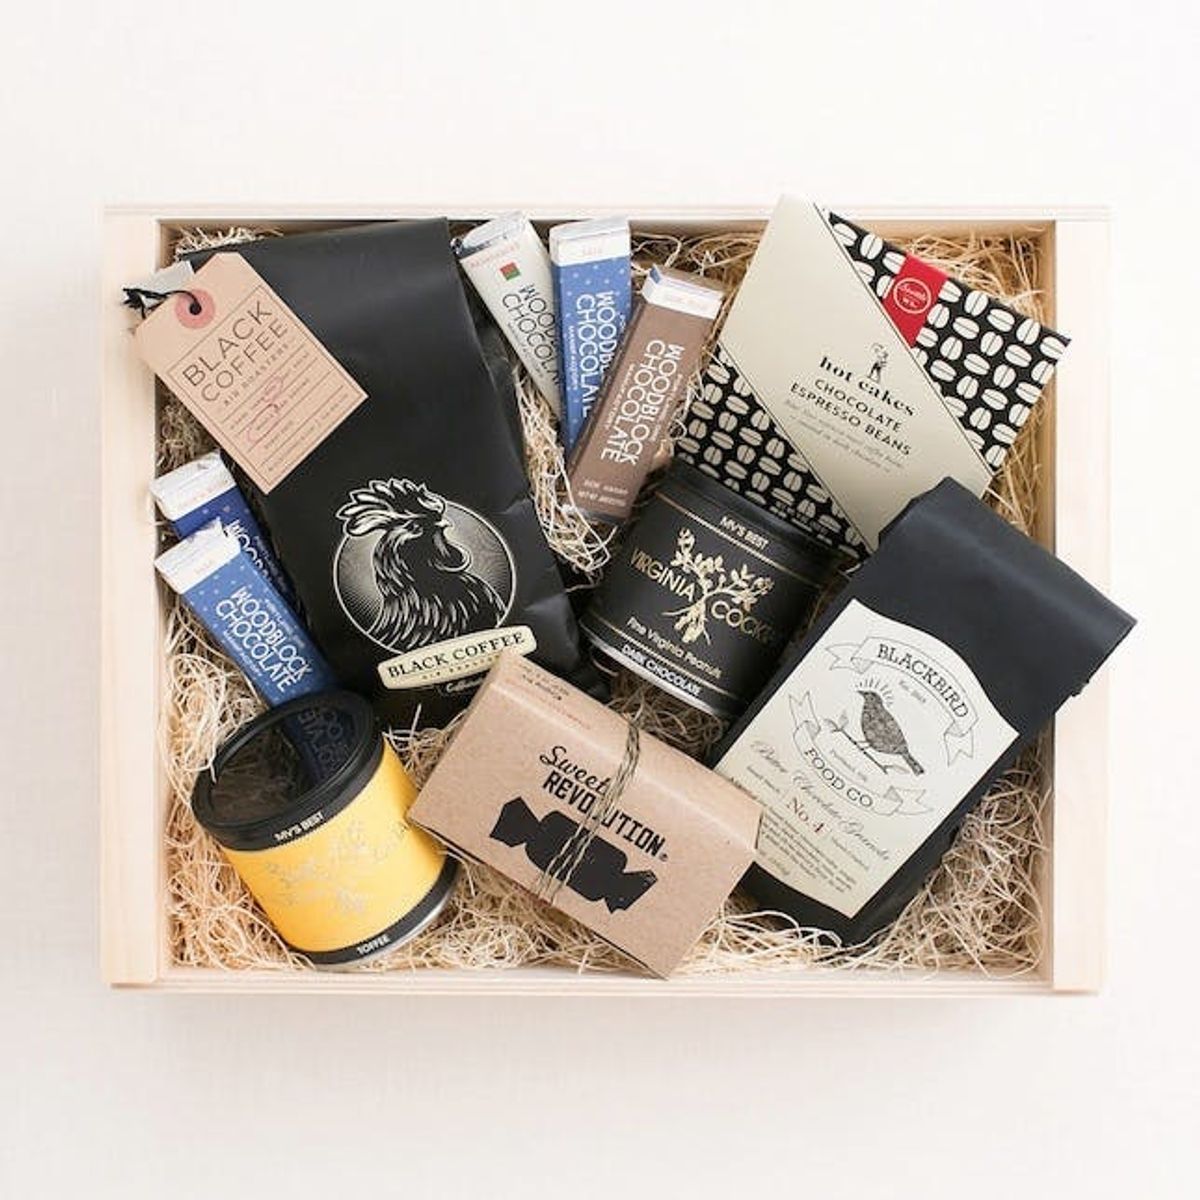 This Is the Fancy Gift Box Design Lovers Will Want to Open